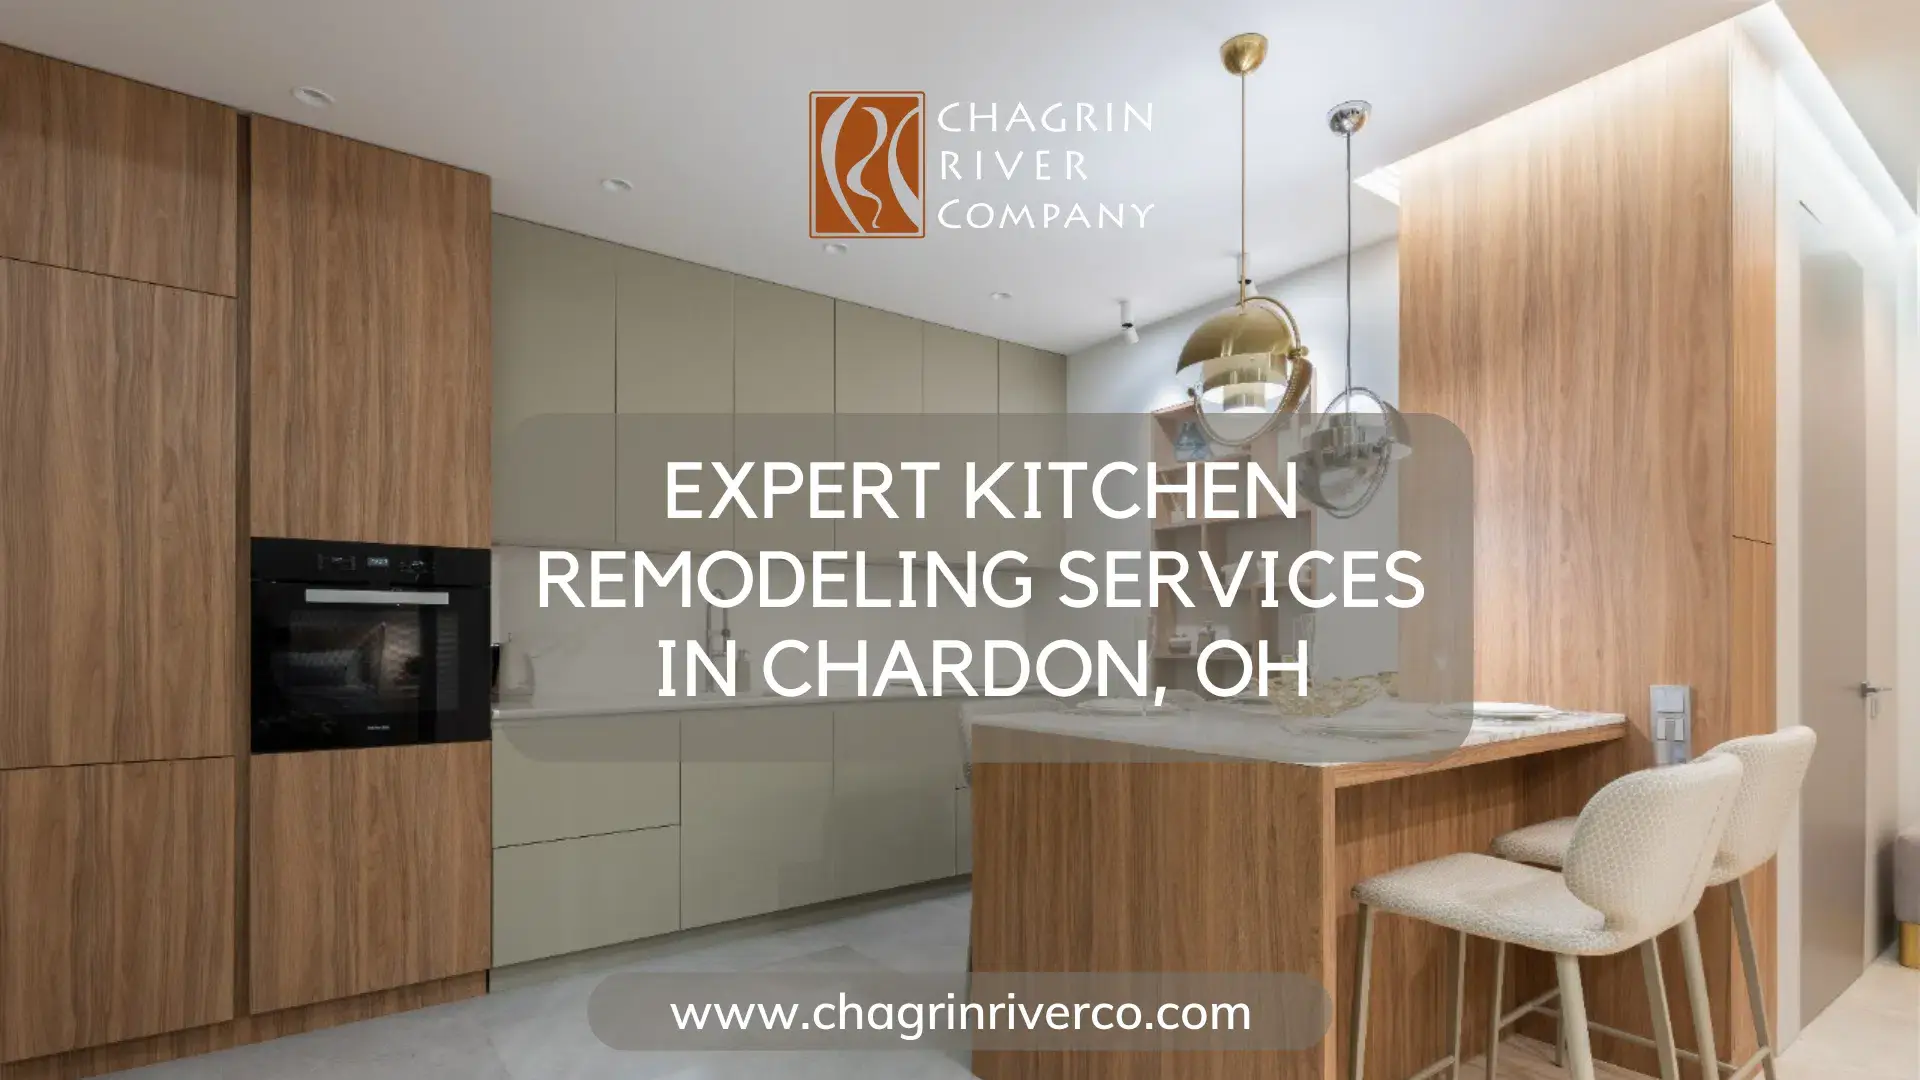 Expert Kitchen Remodeling Services in Chardon, OH